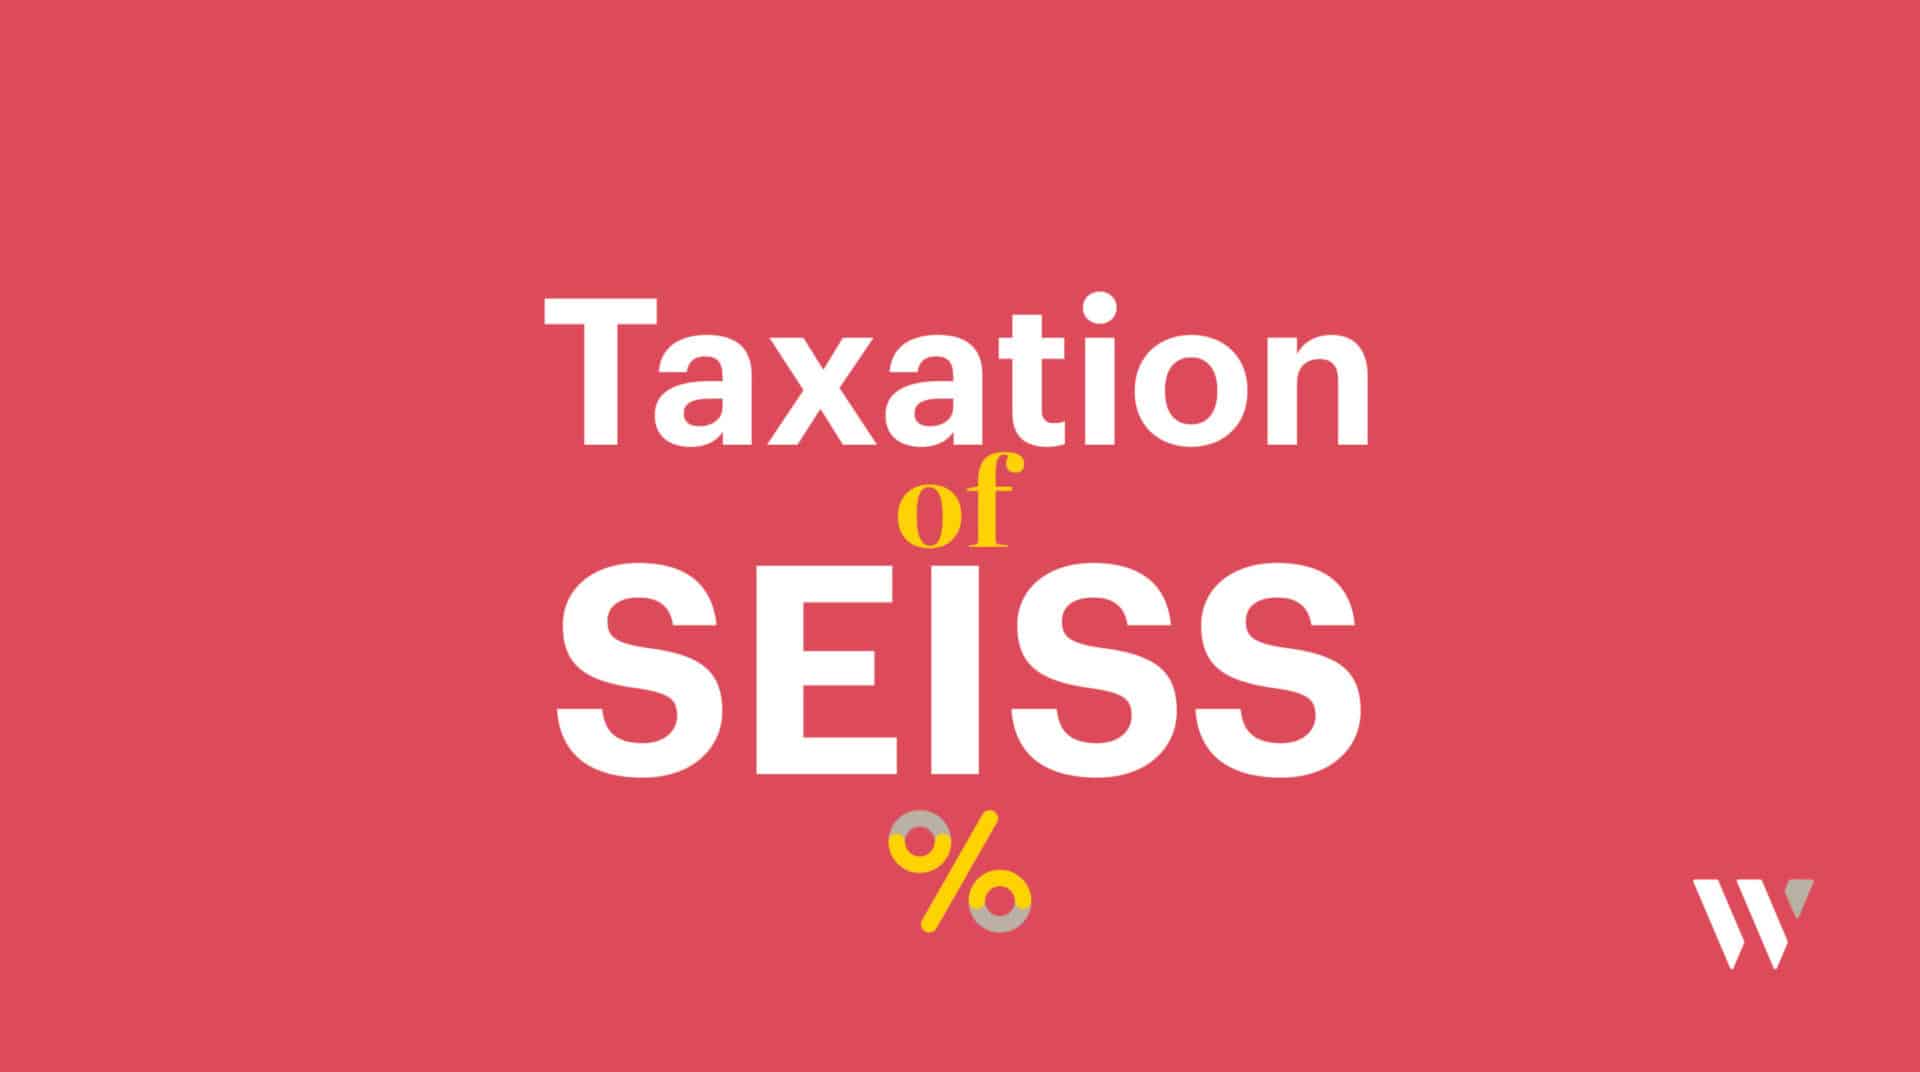 Taxation of the Self-Employment Income Support Scheme